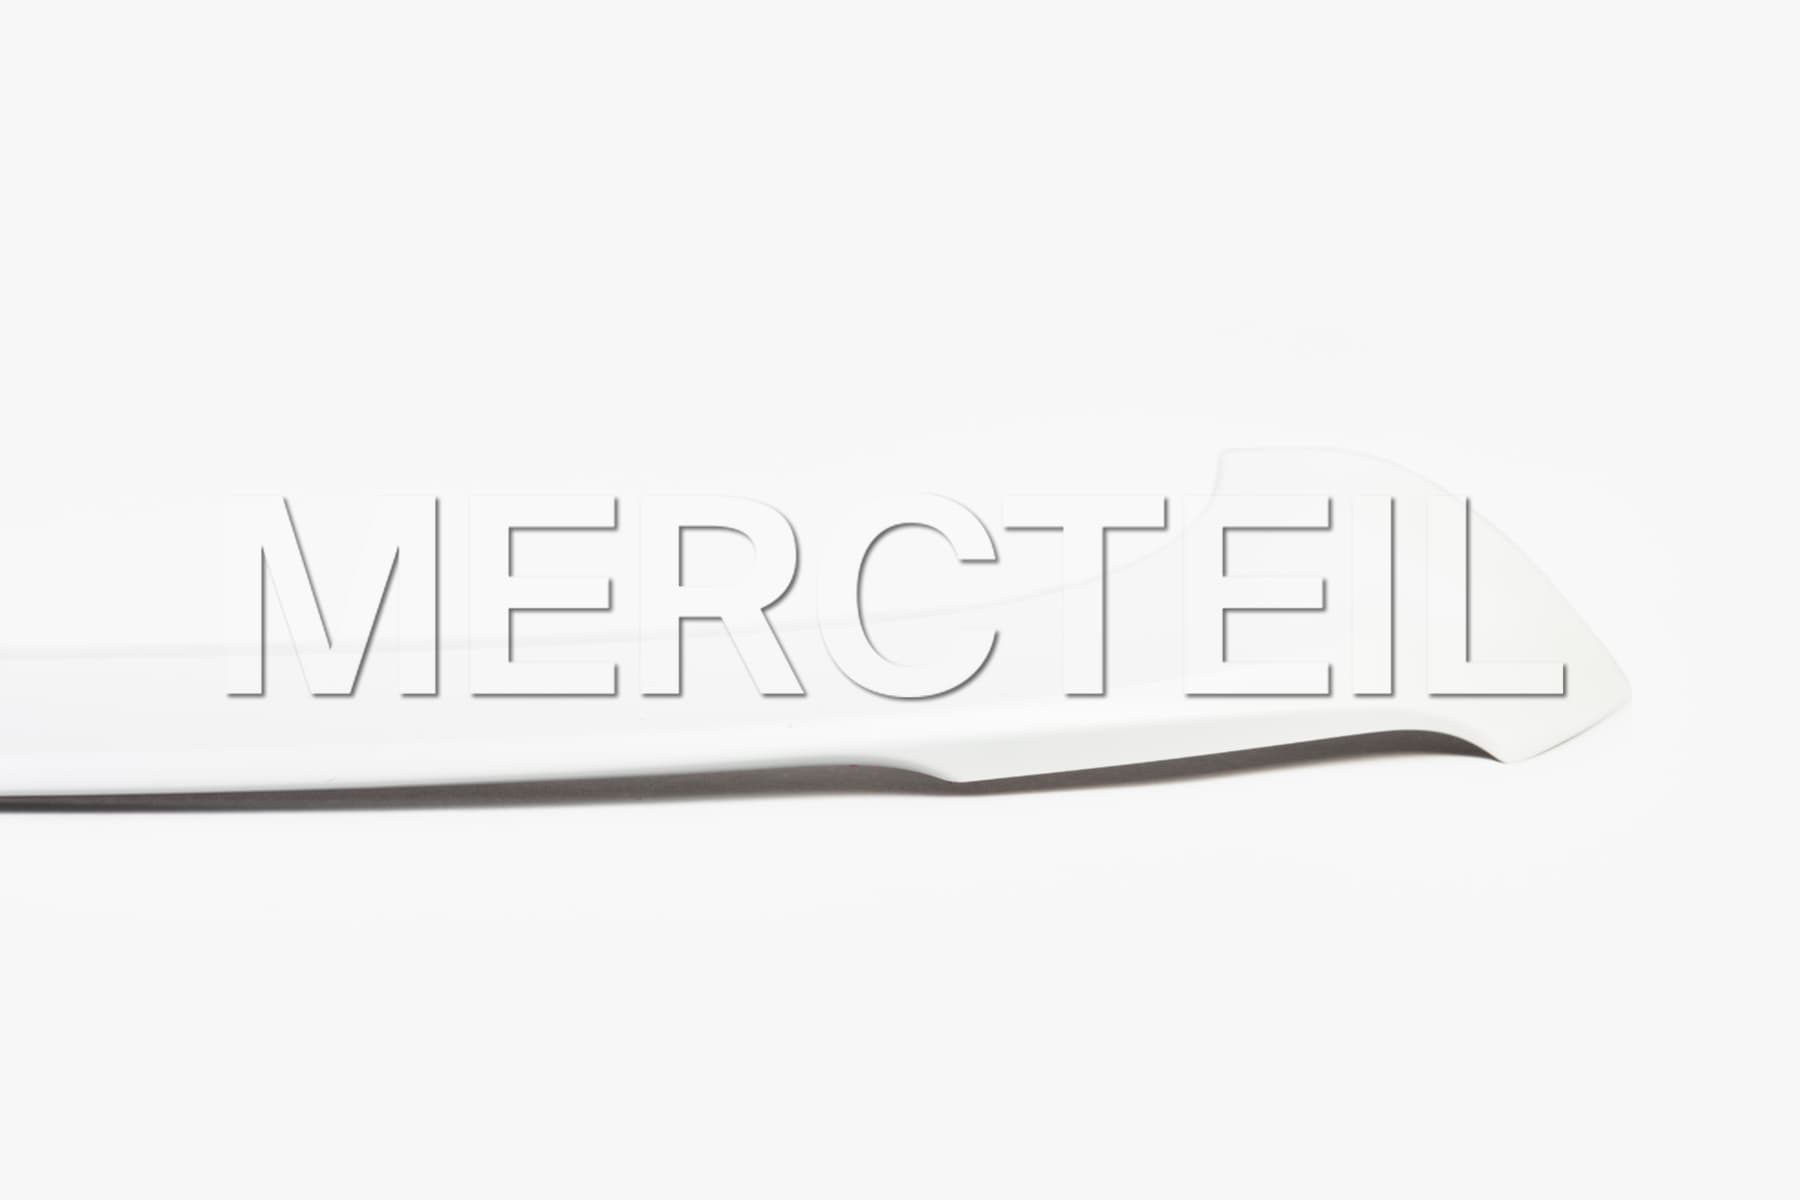 Spoiler for C Class Estate S205 Genuine Mercedes Benz (part number: A2057930588)